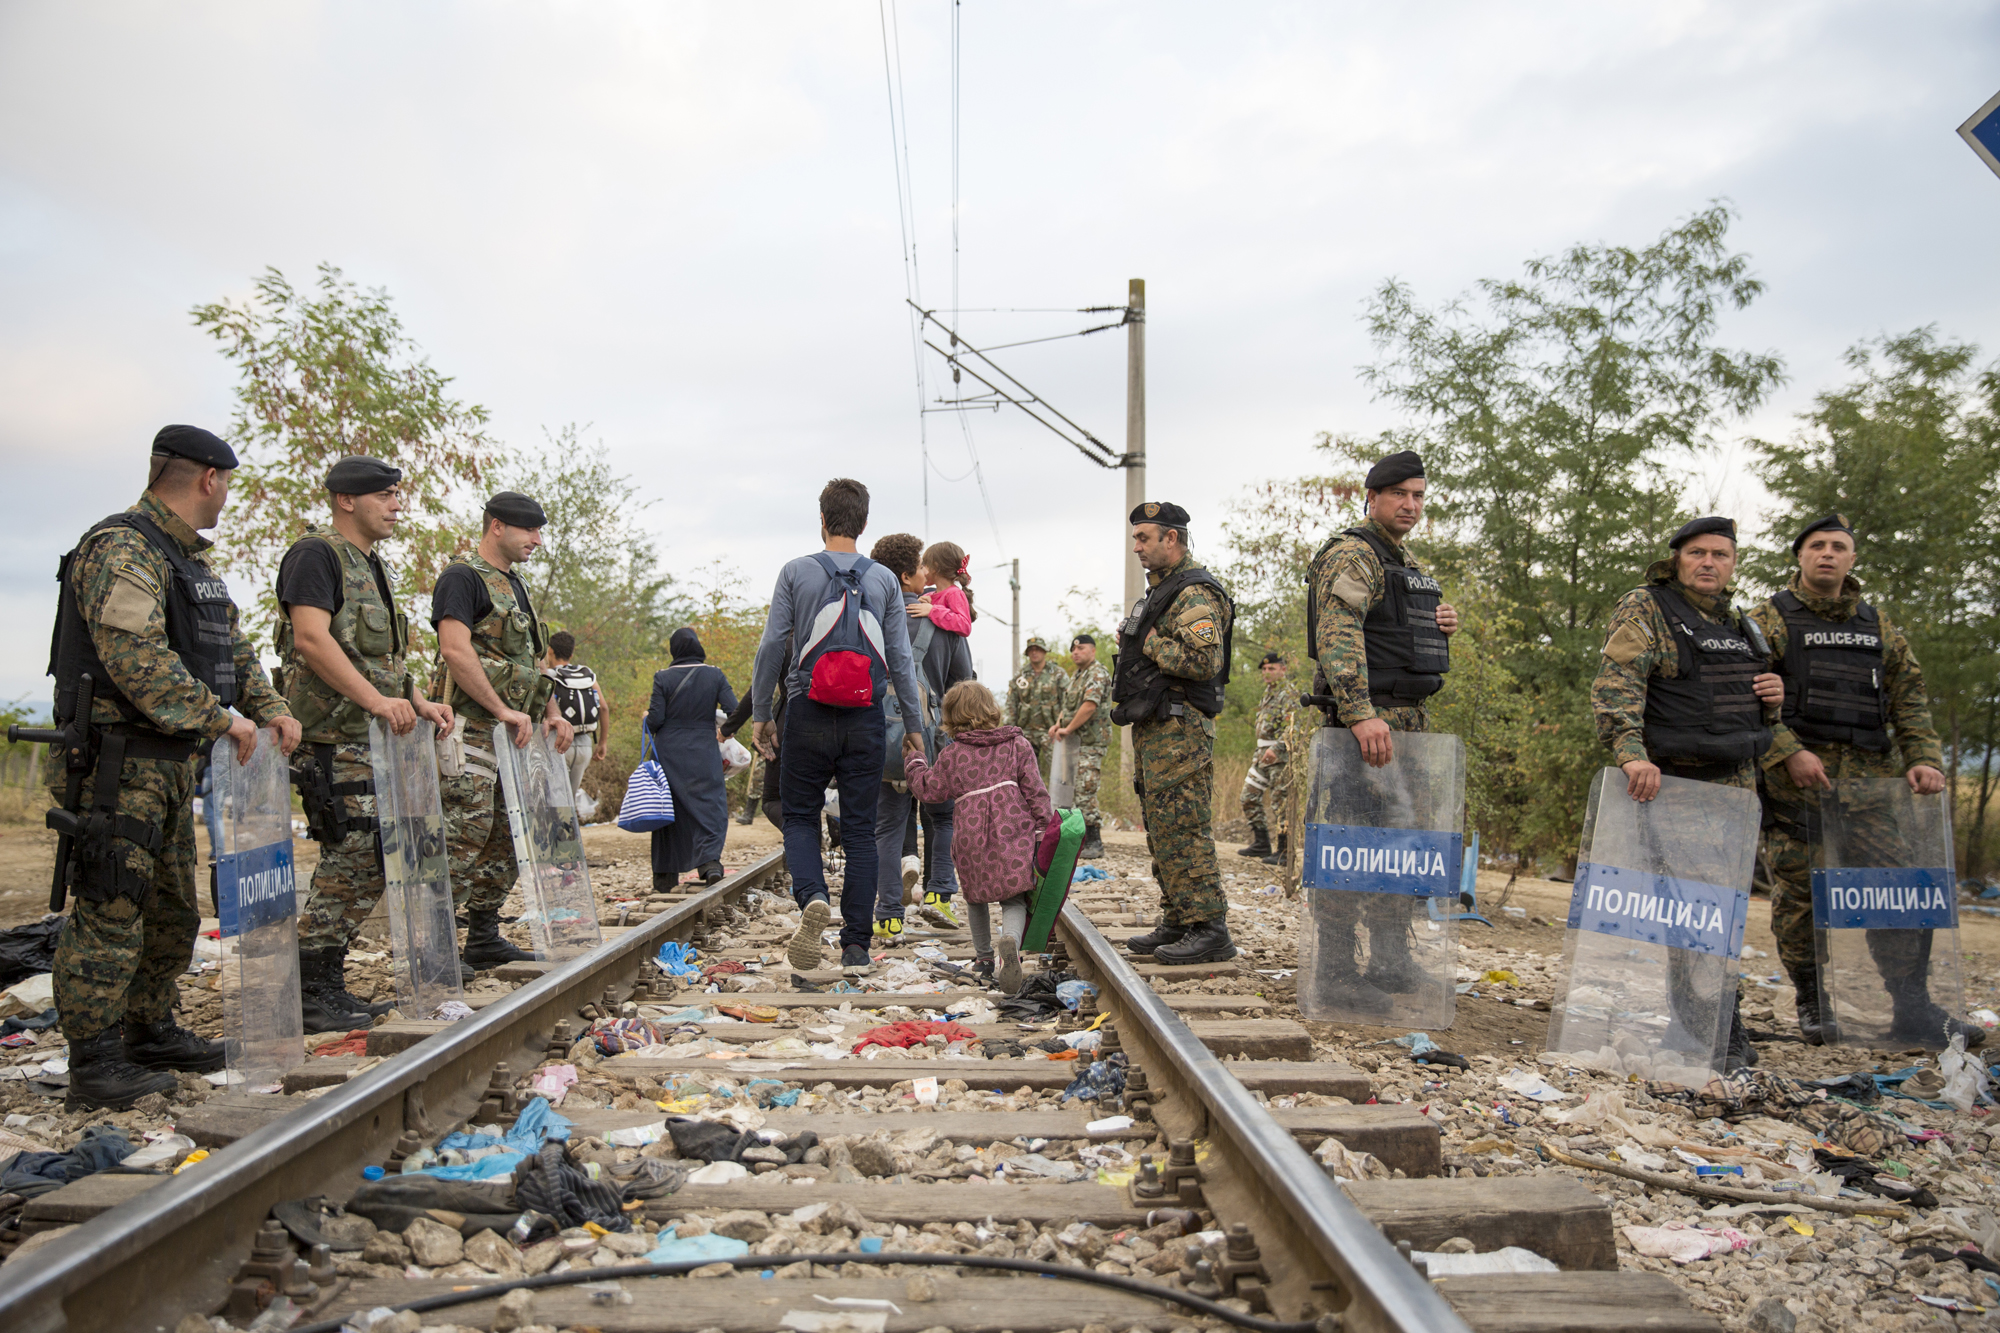 Refugees and migrants - Greece/Macedonia